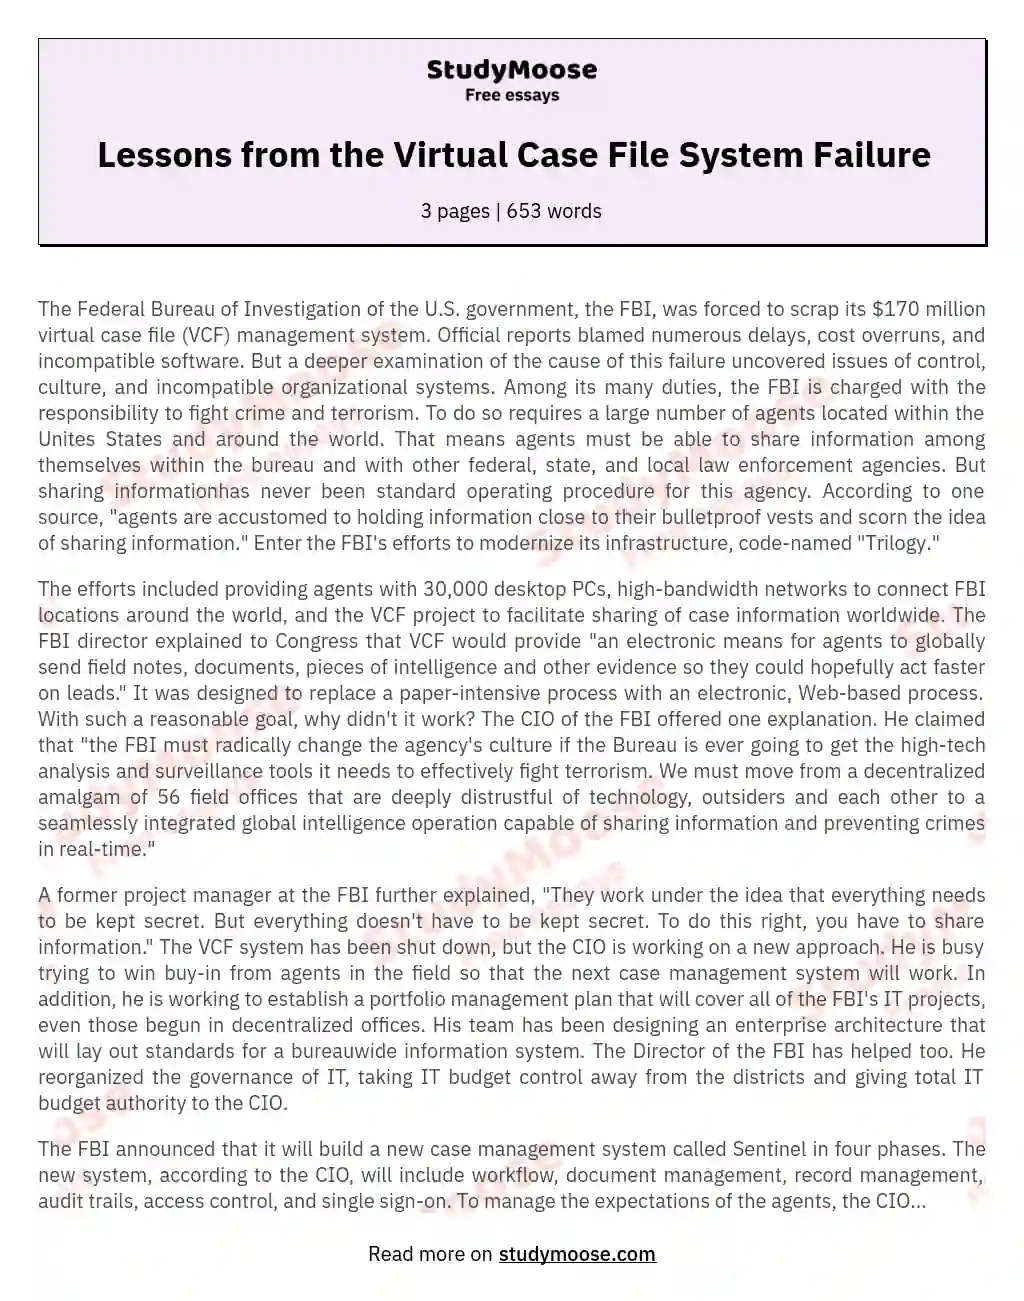 Lessons from the Virtual Case File System Failure essay